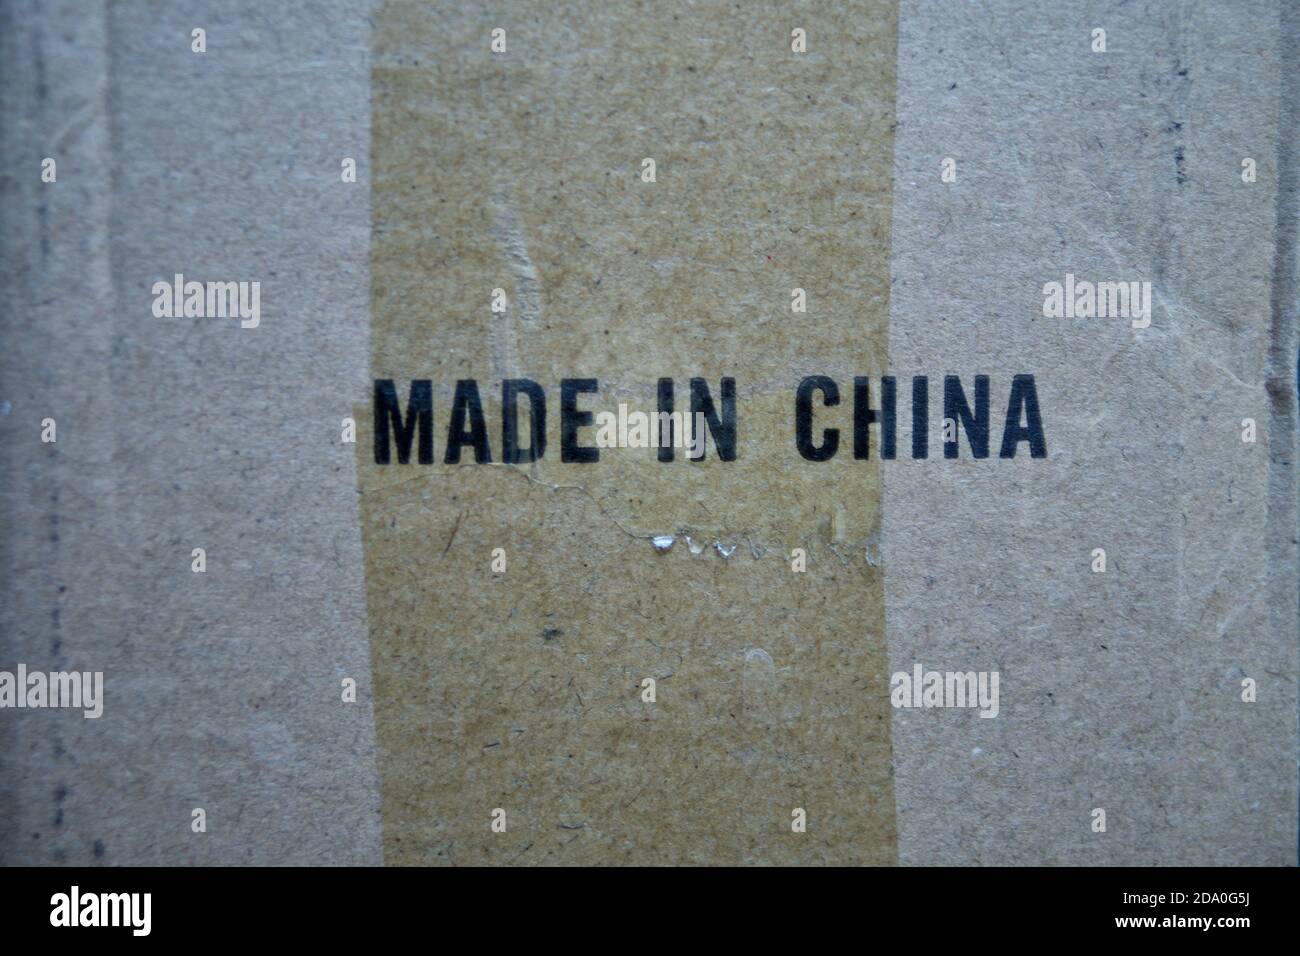 Made in China printed in black latters on a bright brown background Stock Photo